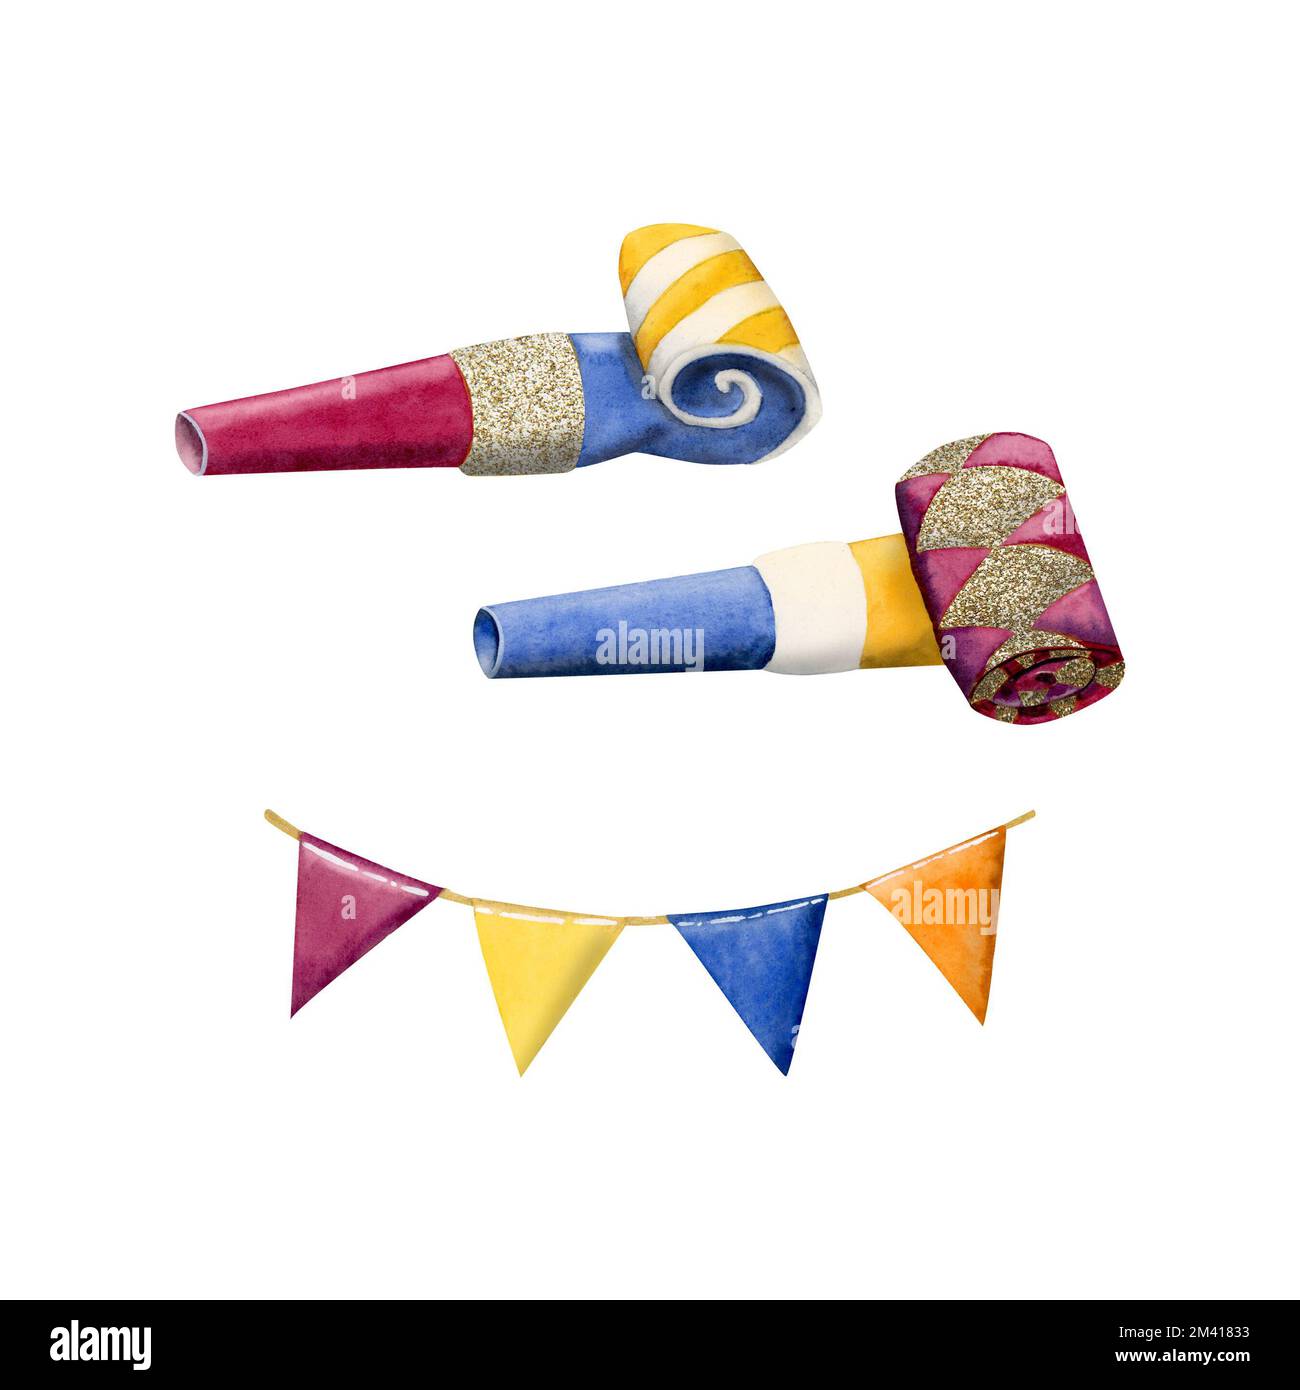 Birthday whistle isolated Stock Photo by ©5seconds 127454568